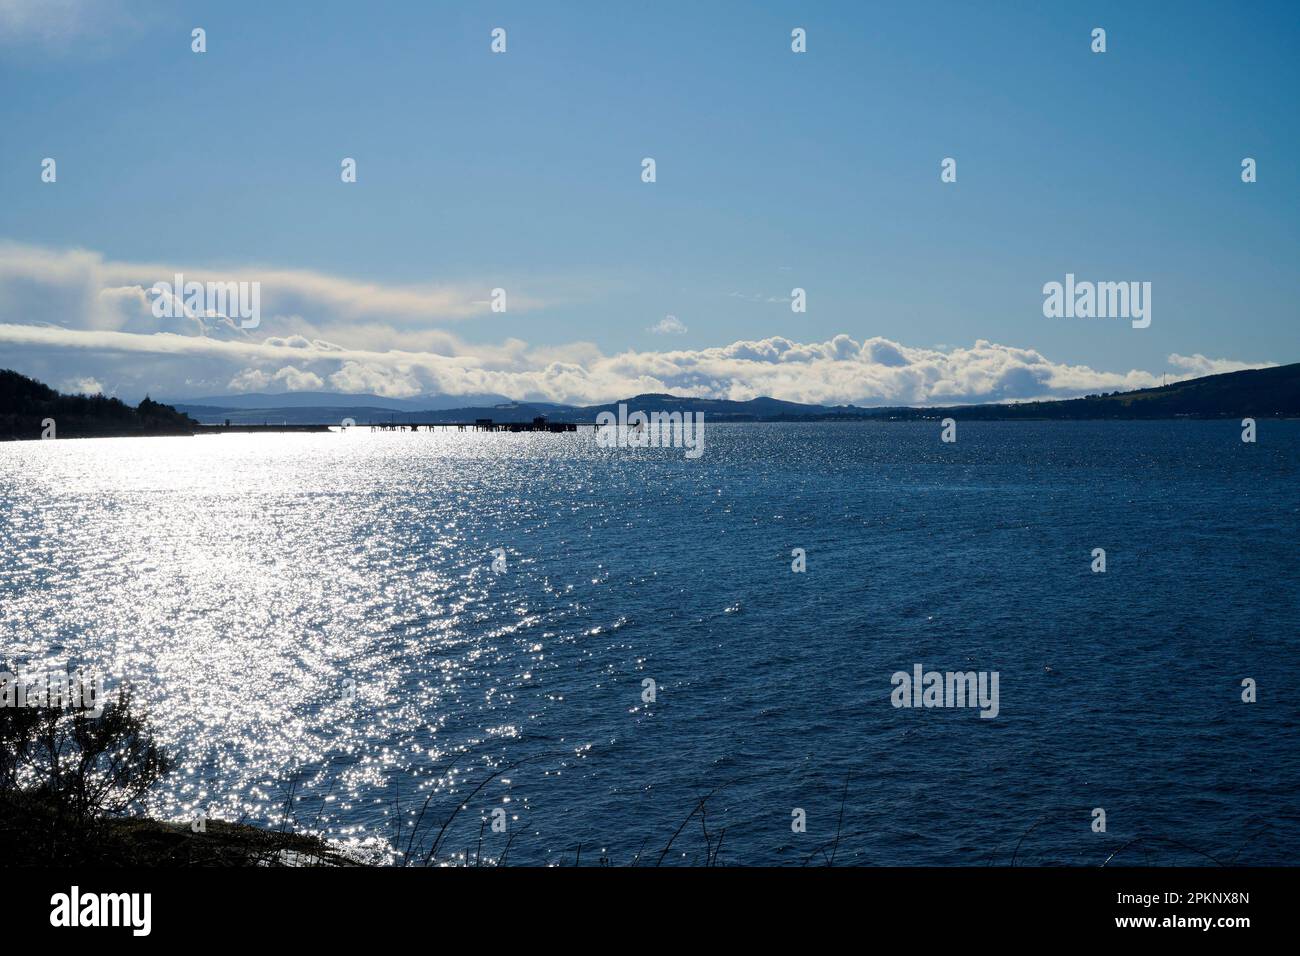 The Clyde Estuary at Inverkip Bay, Western Scotland, UK showing snow cover mountains across the water Stock Photo